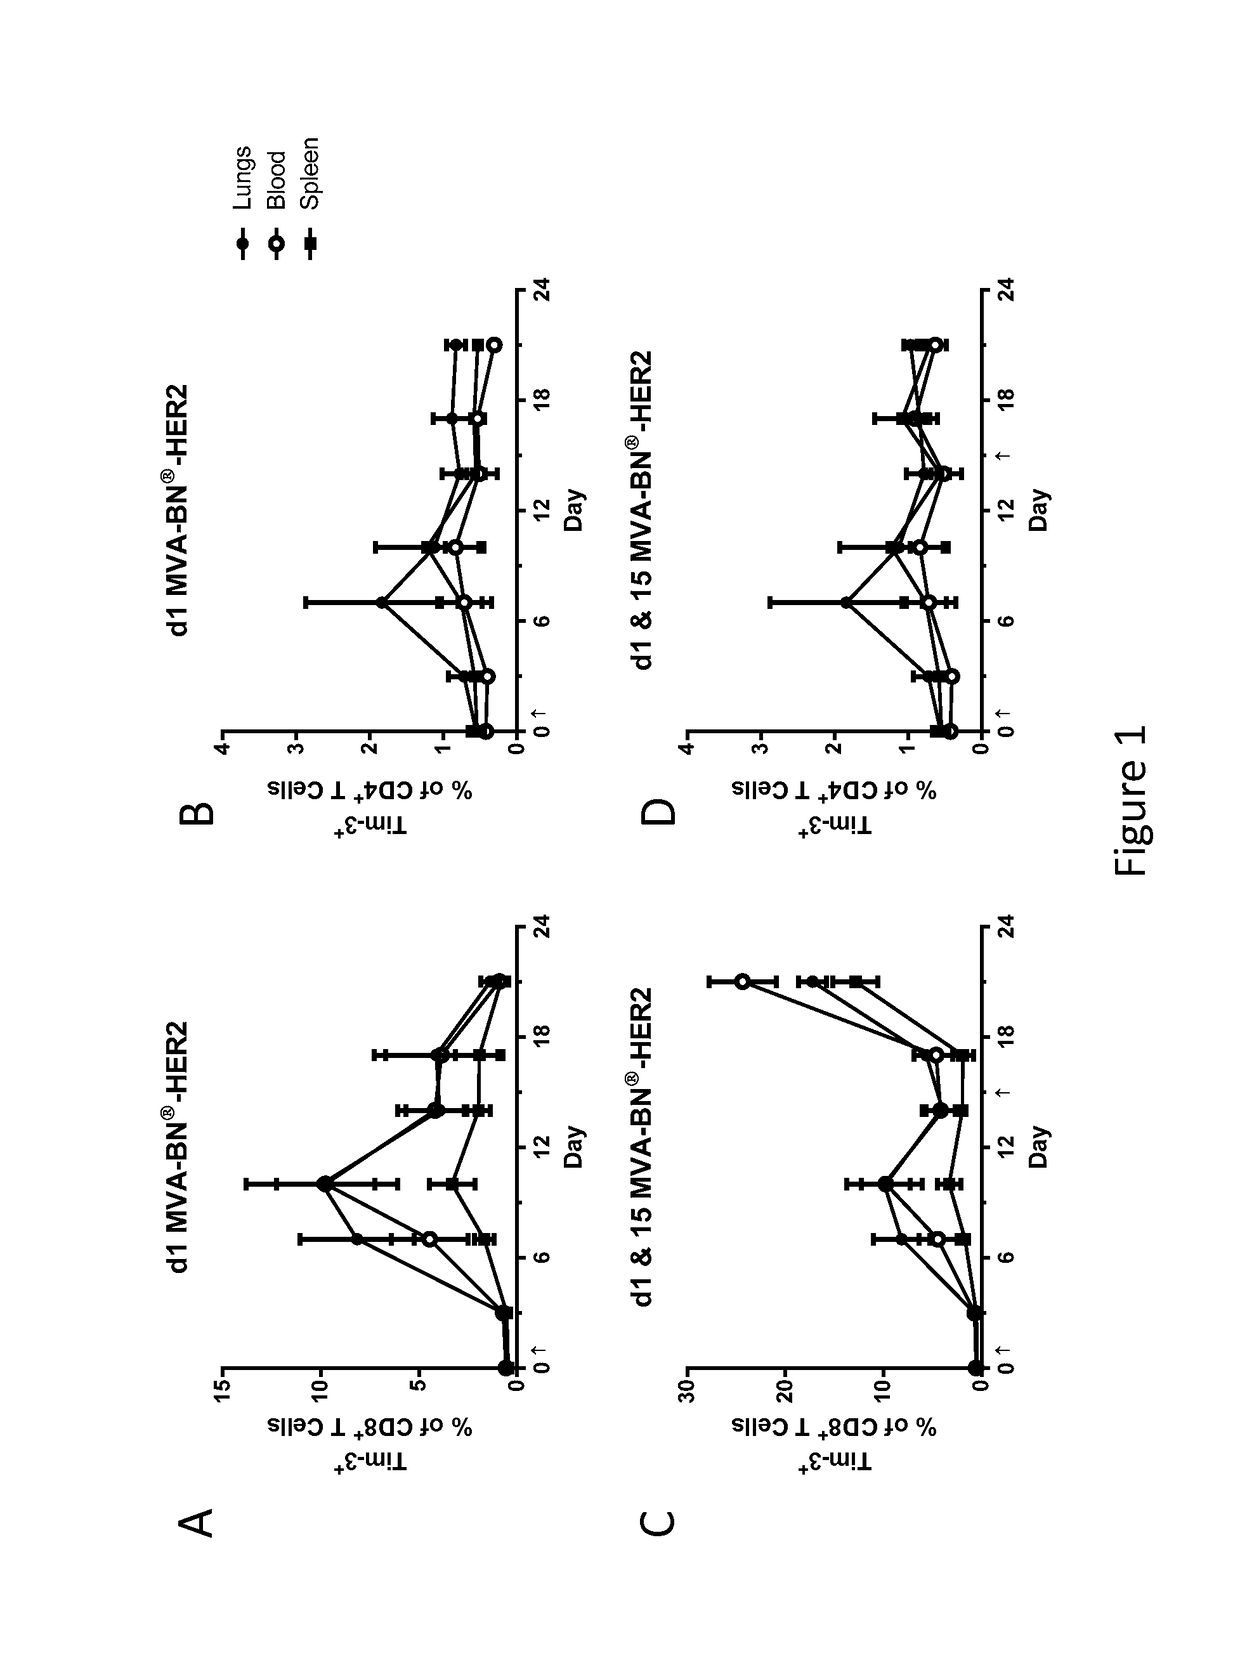 Combination Therapy for Treating Cancer with a Poxvirus Expressing a Tumor Antigen and an Antagonist of TIM-3